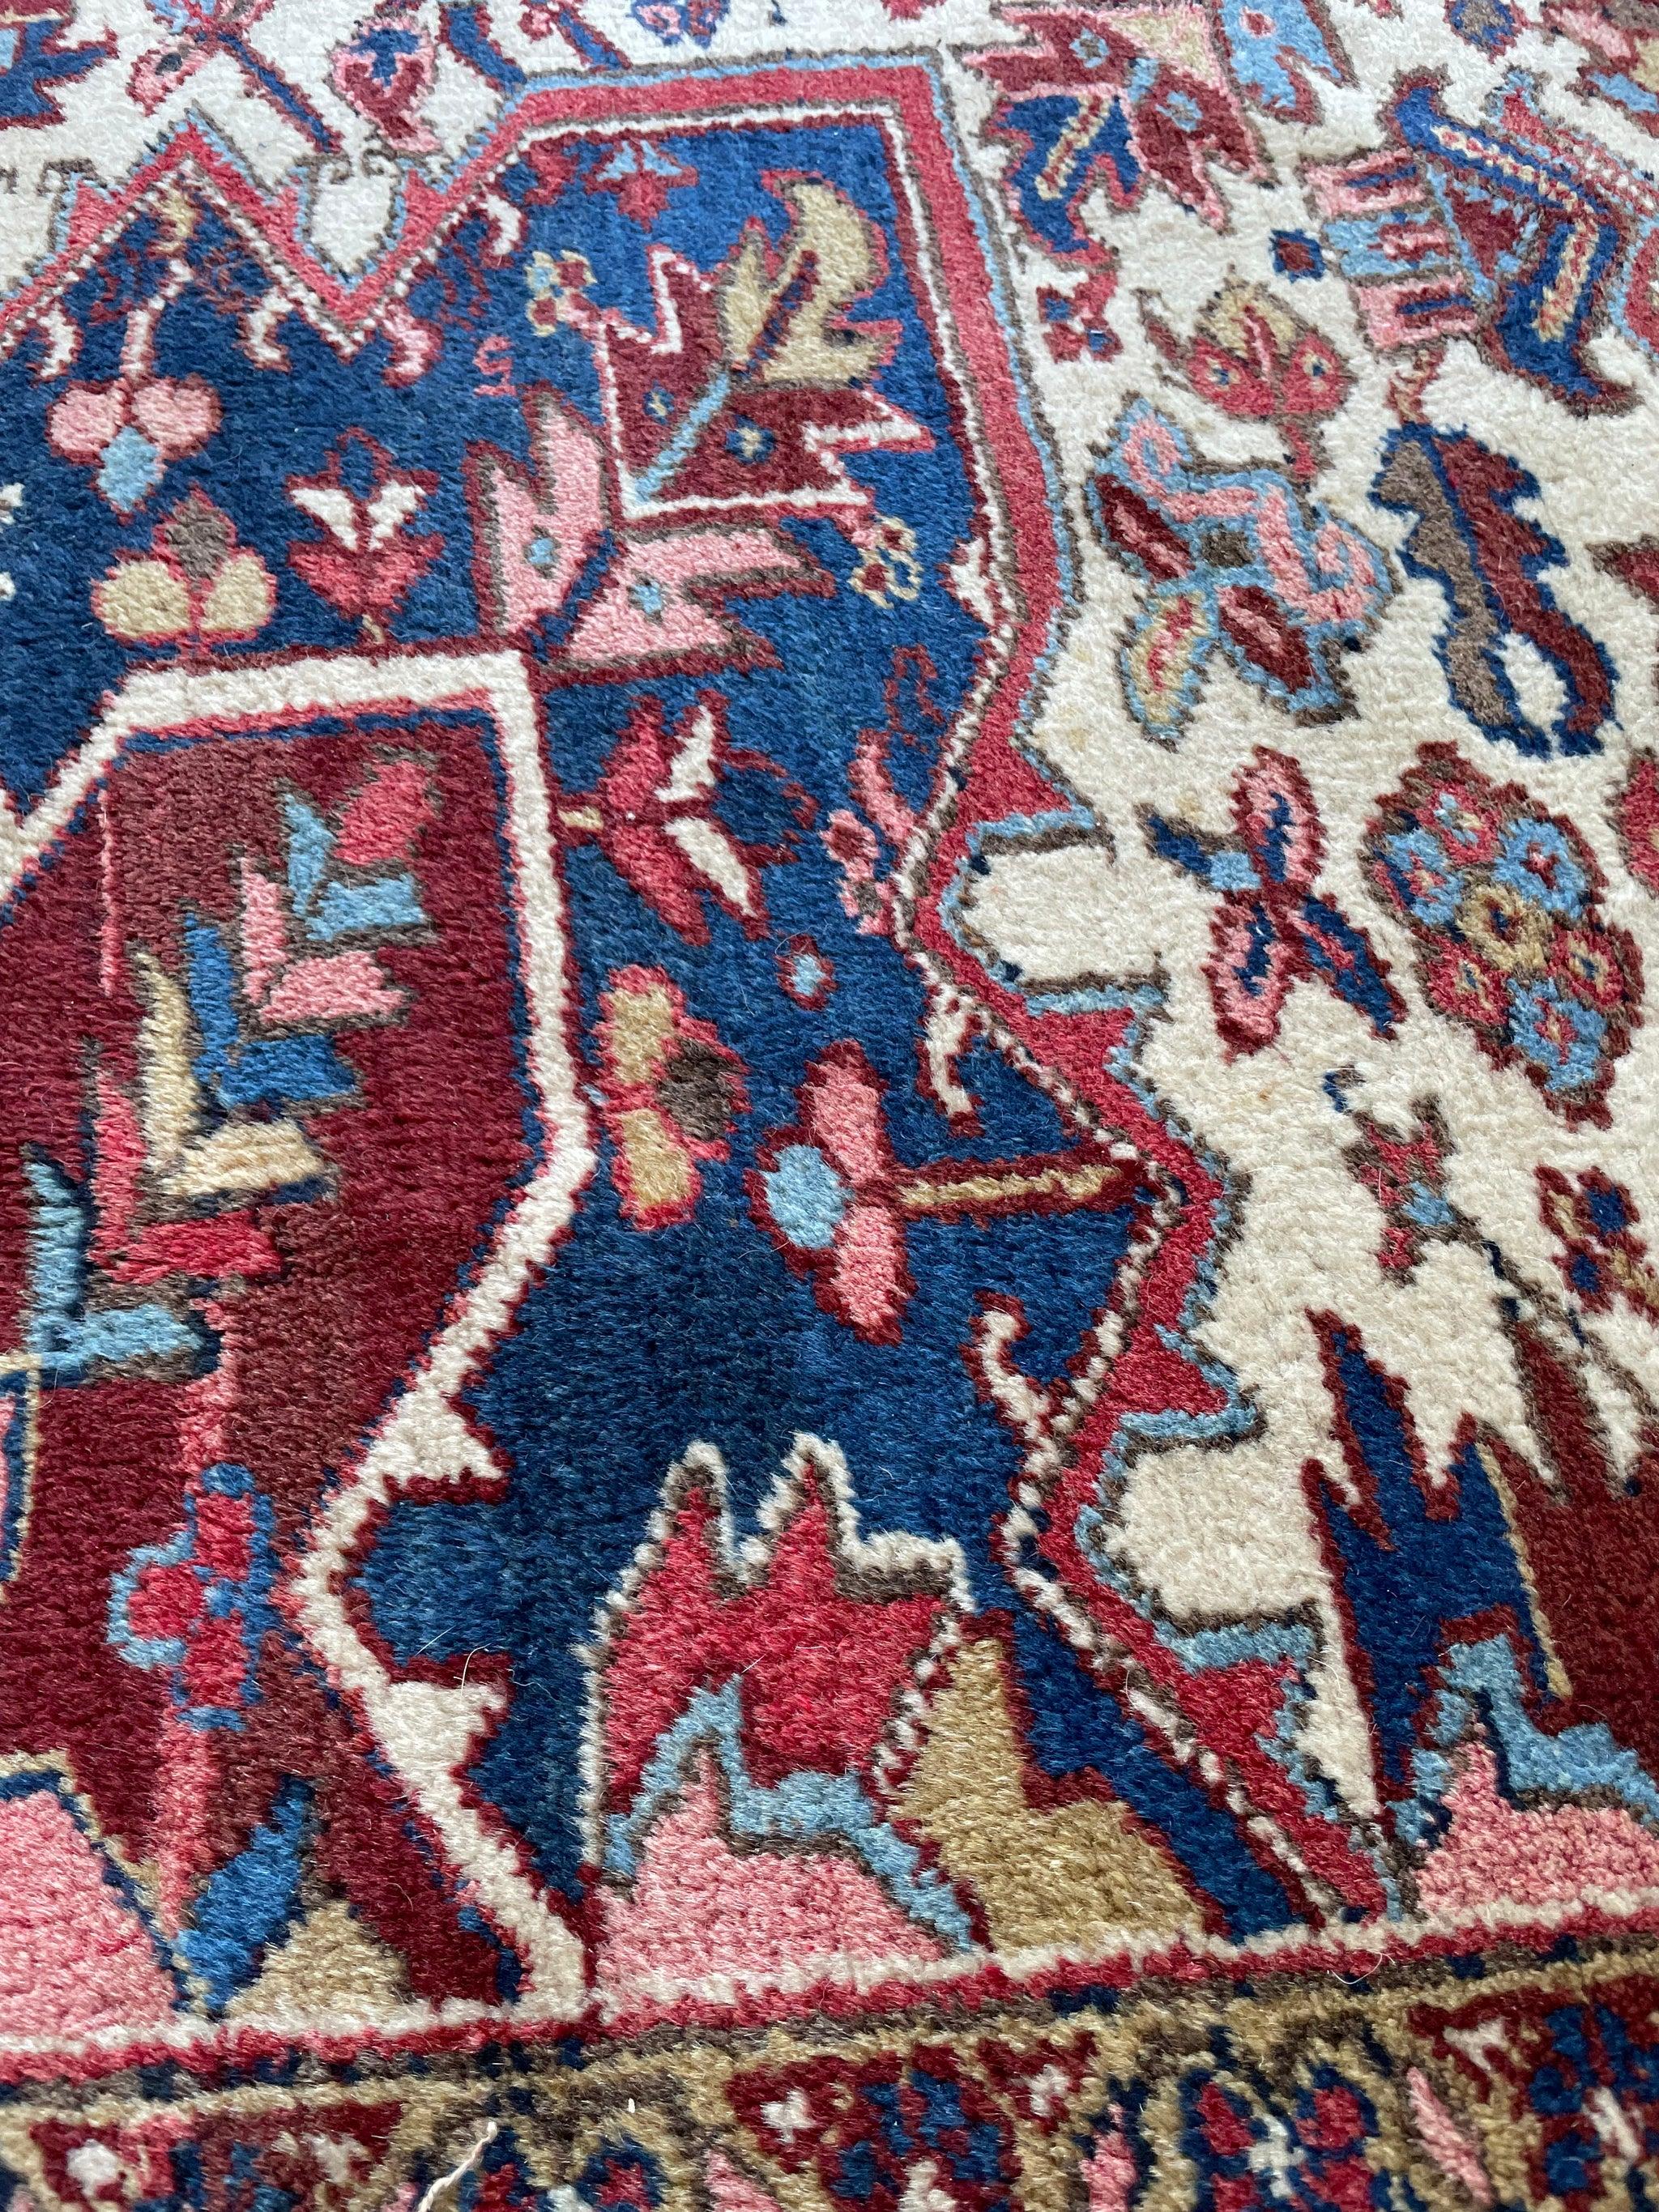 Two-toned Palace Size Vintage Northwest Tribal Heriz Rug, c.1950's For Sale 1